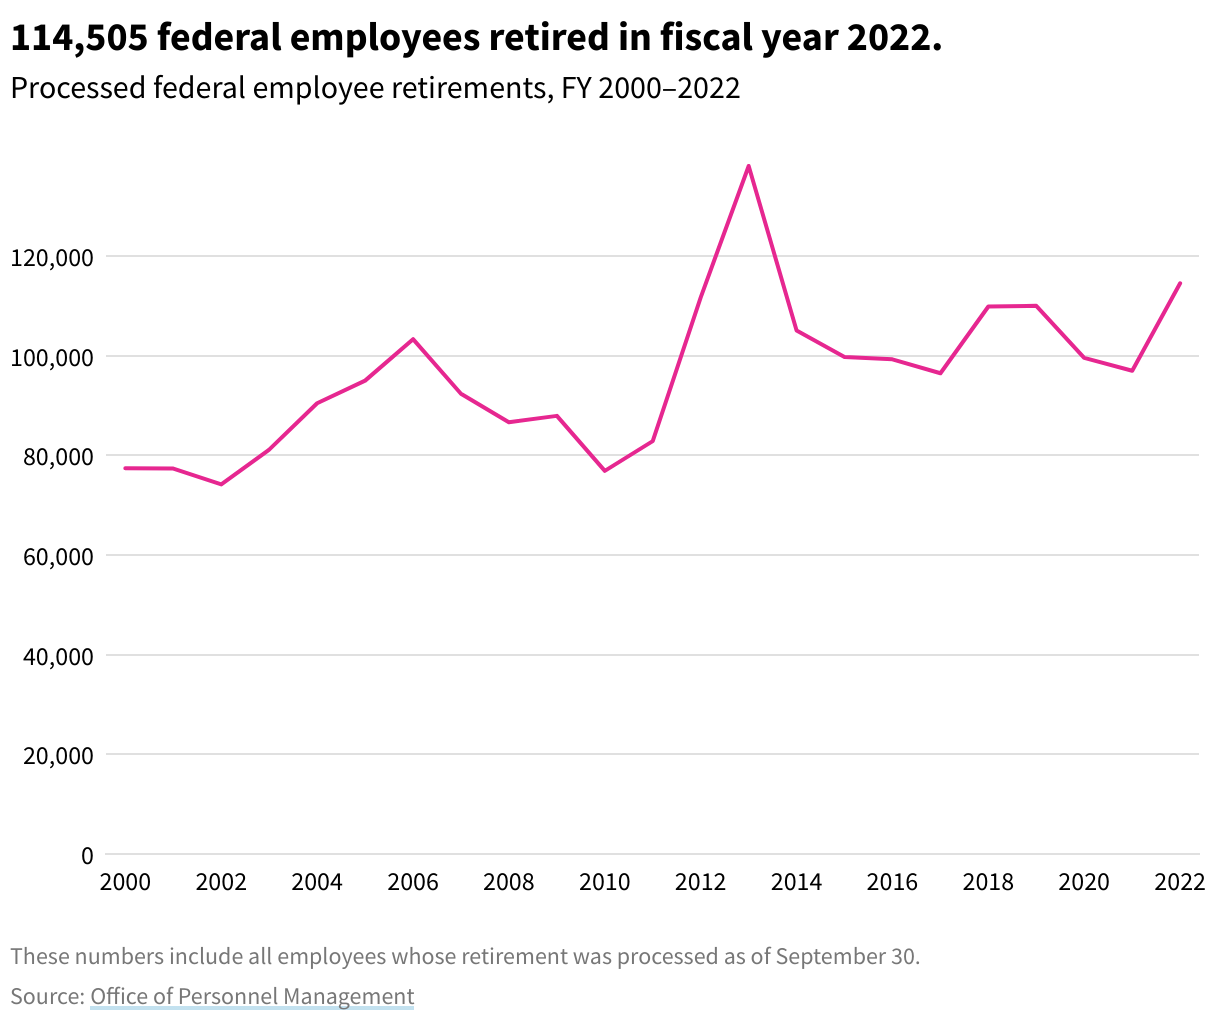 Line chart showing the number of retired federal employees over time. In 2022, 114,505 people retired.